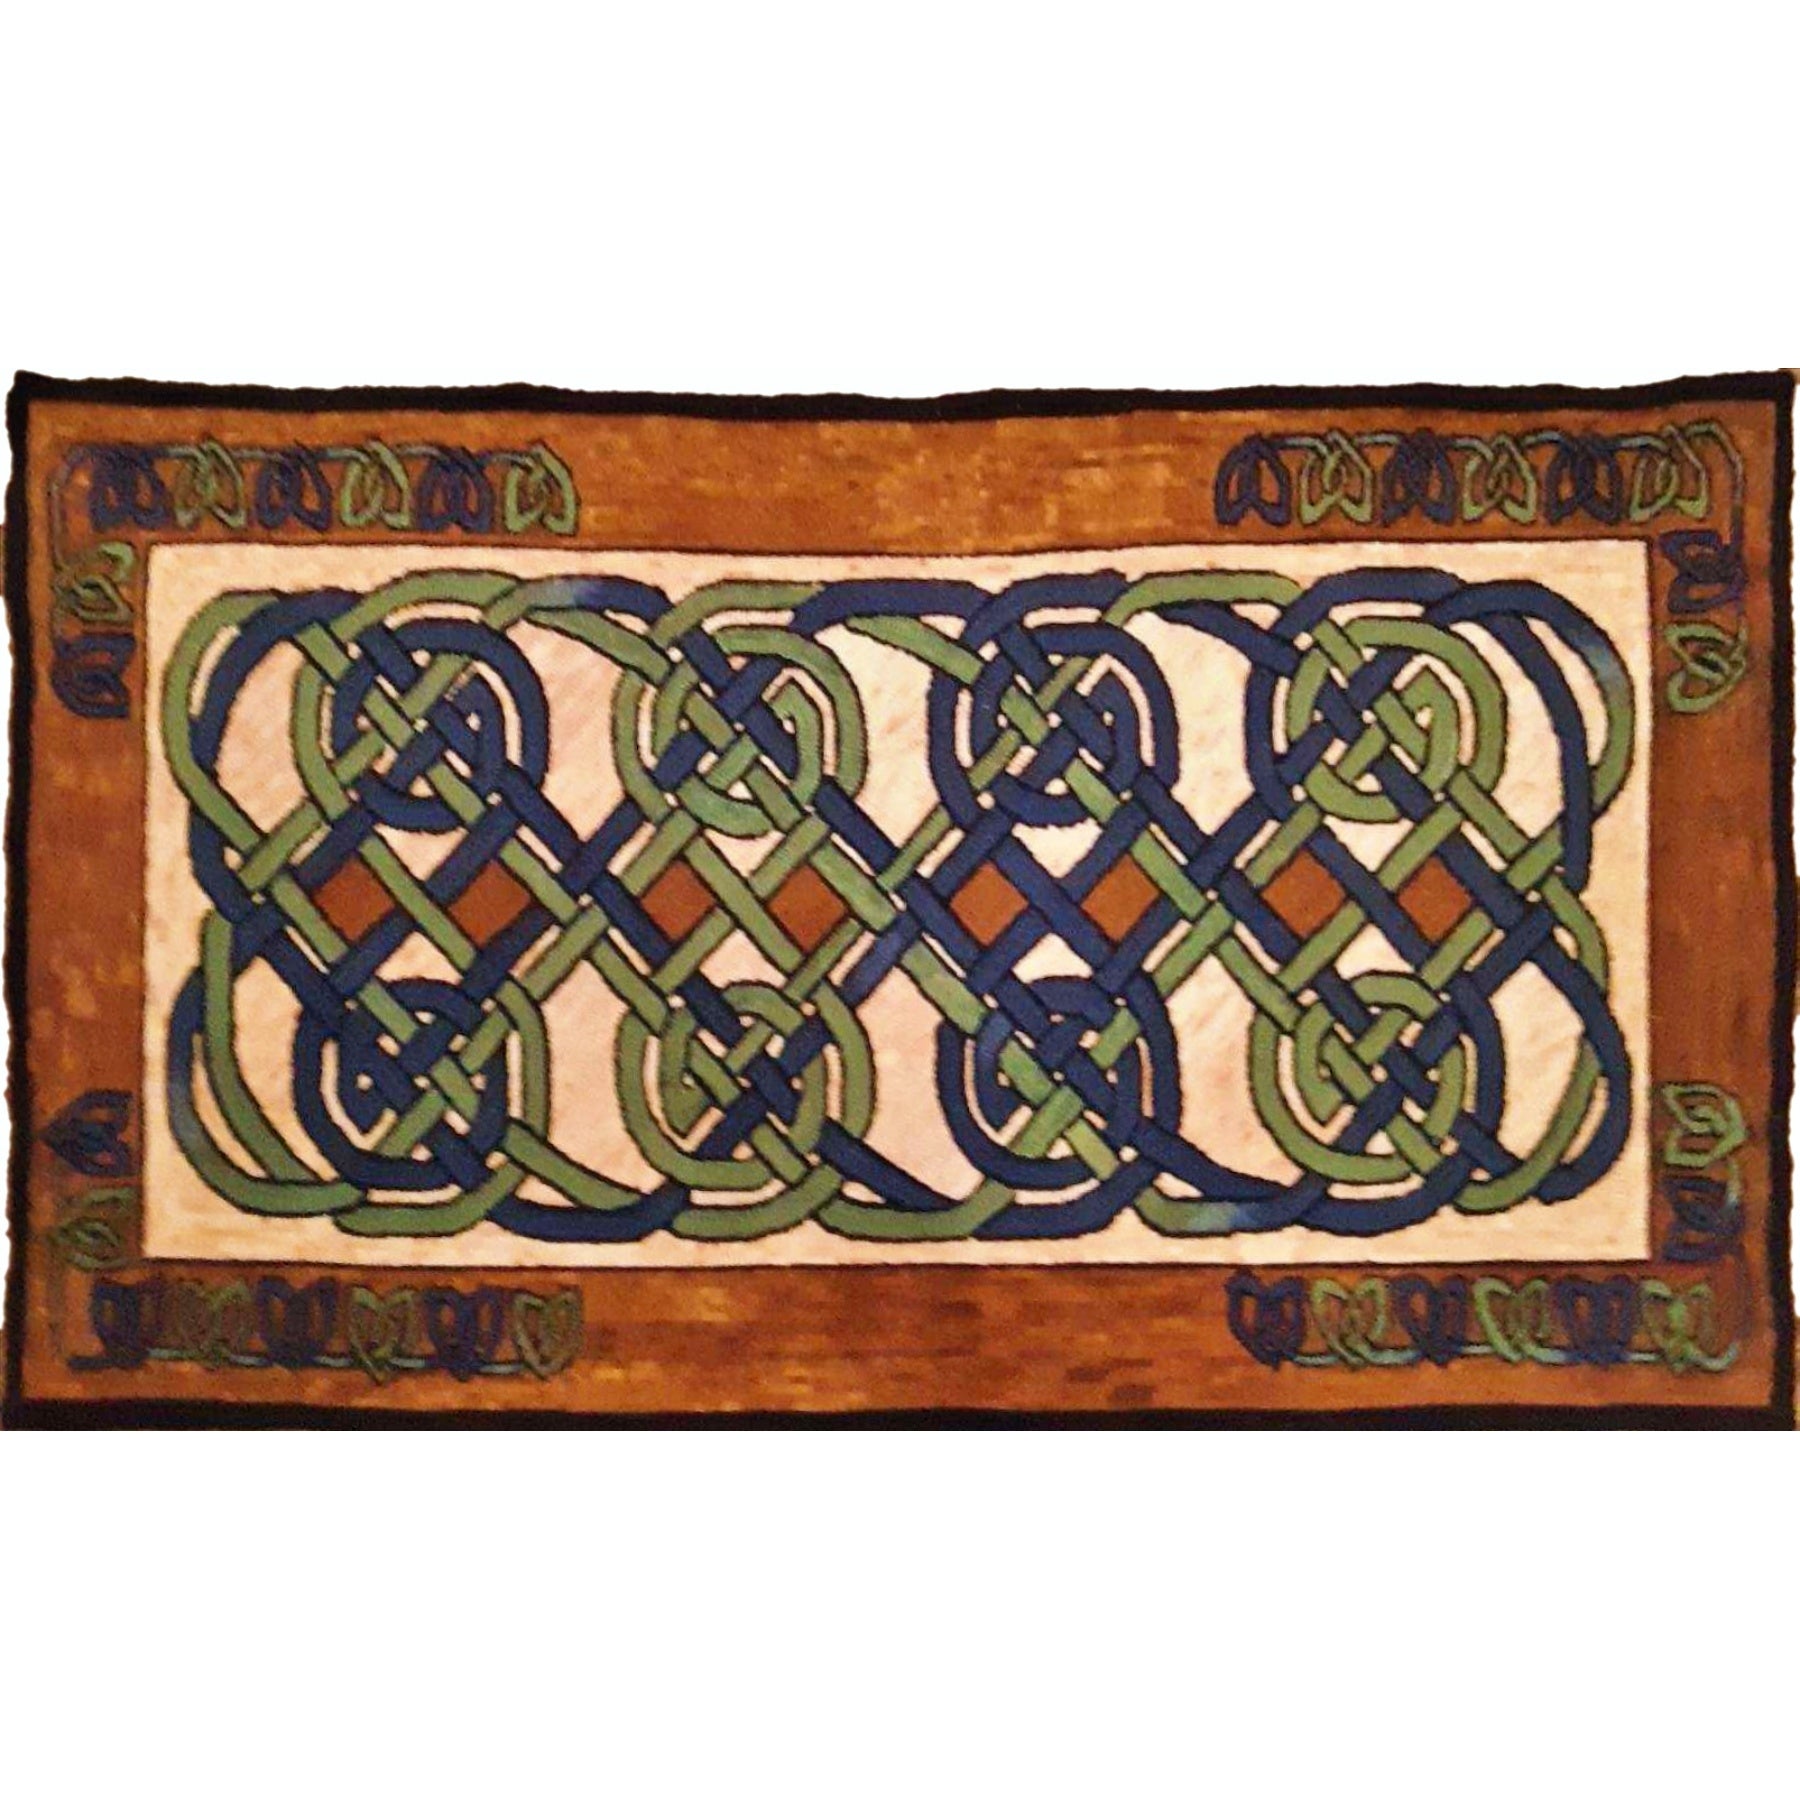 Celtic Knots, rug hooked by Marci Braun